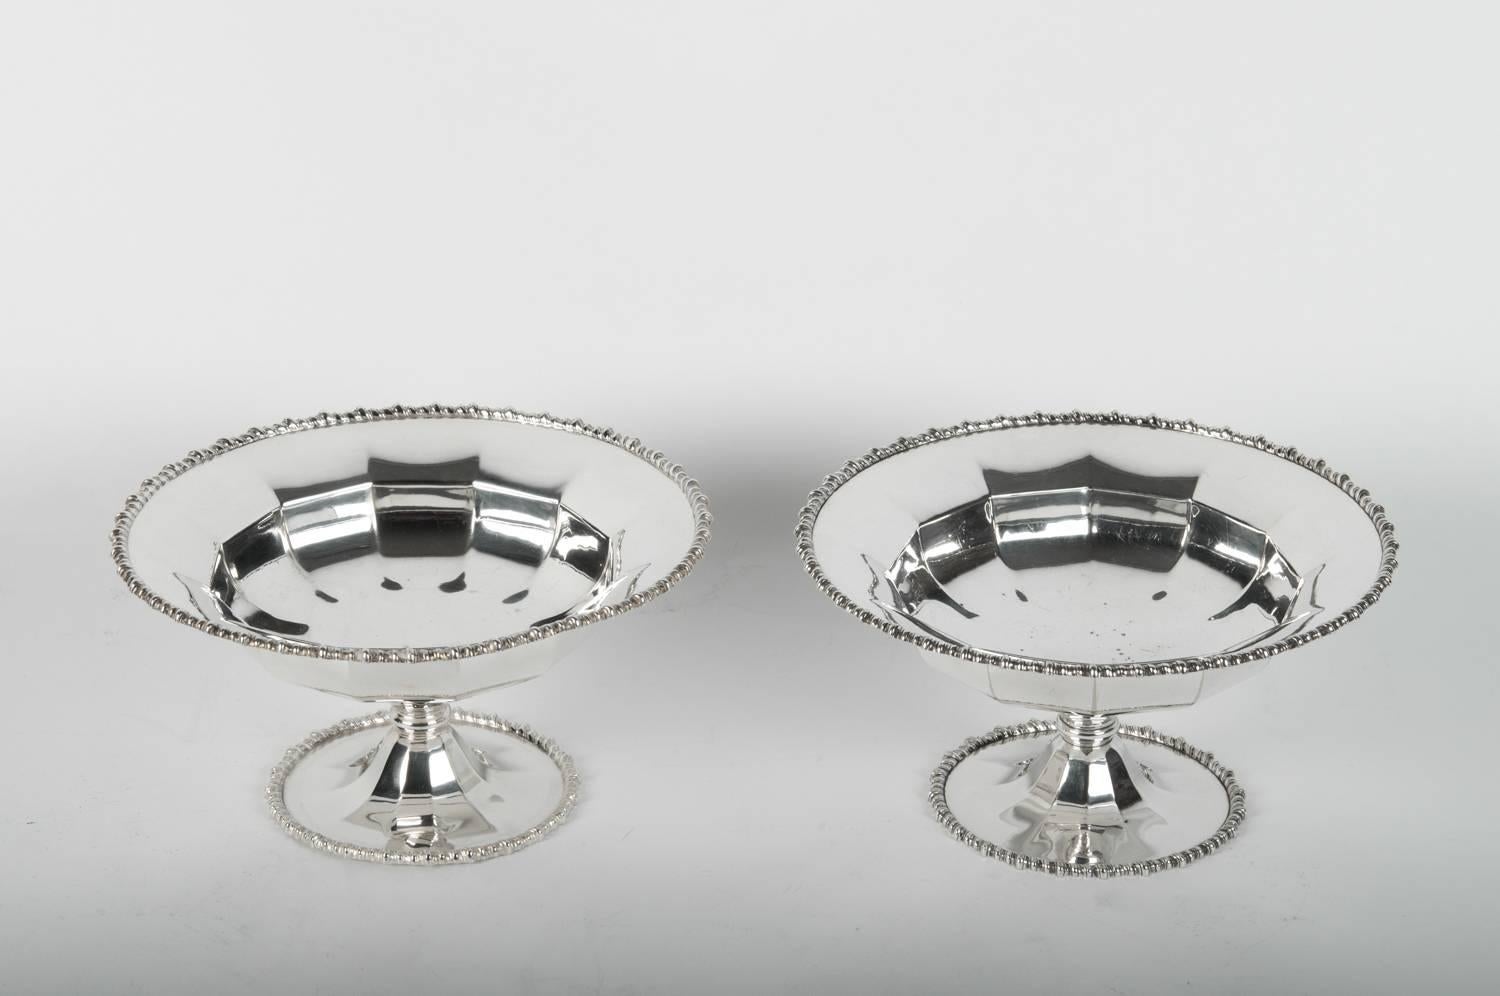 Mid-20th century English silver plated pair of dessert serving pieces / compote. Each one is in great vintage condition, maker's mark undersigned. Minor wear consistent with age / use. Each one stands about 8.5 inches diameter x 4.5 inches high.